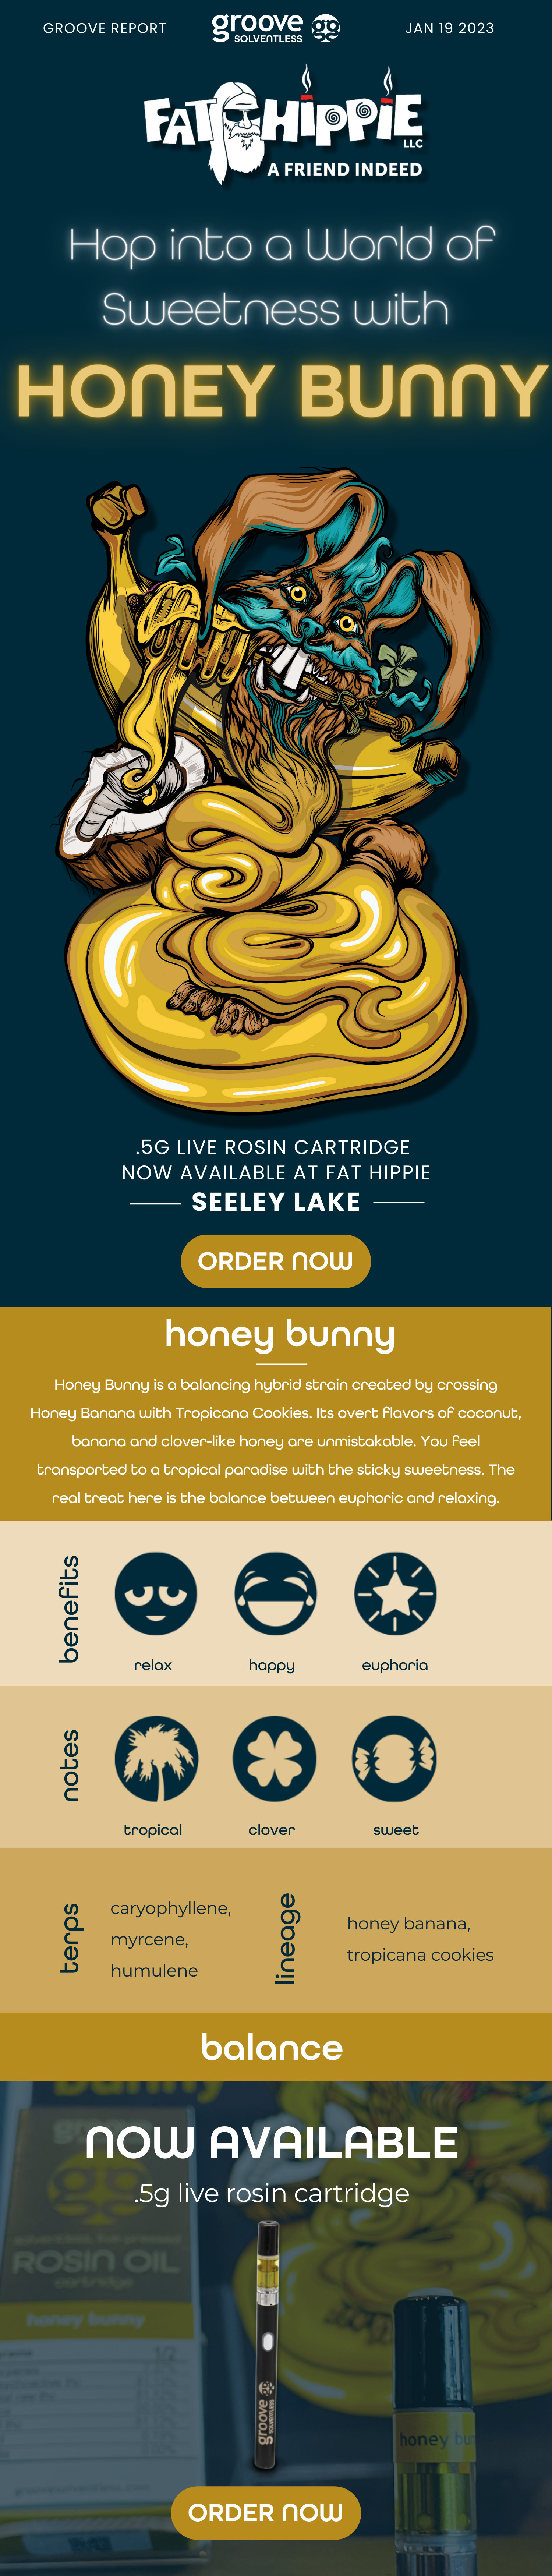 Honey Bunny Cartridges Now Available at Fat Hippie in Seeley Lake